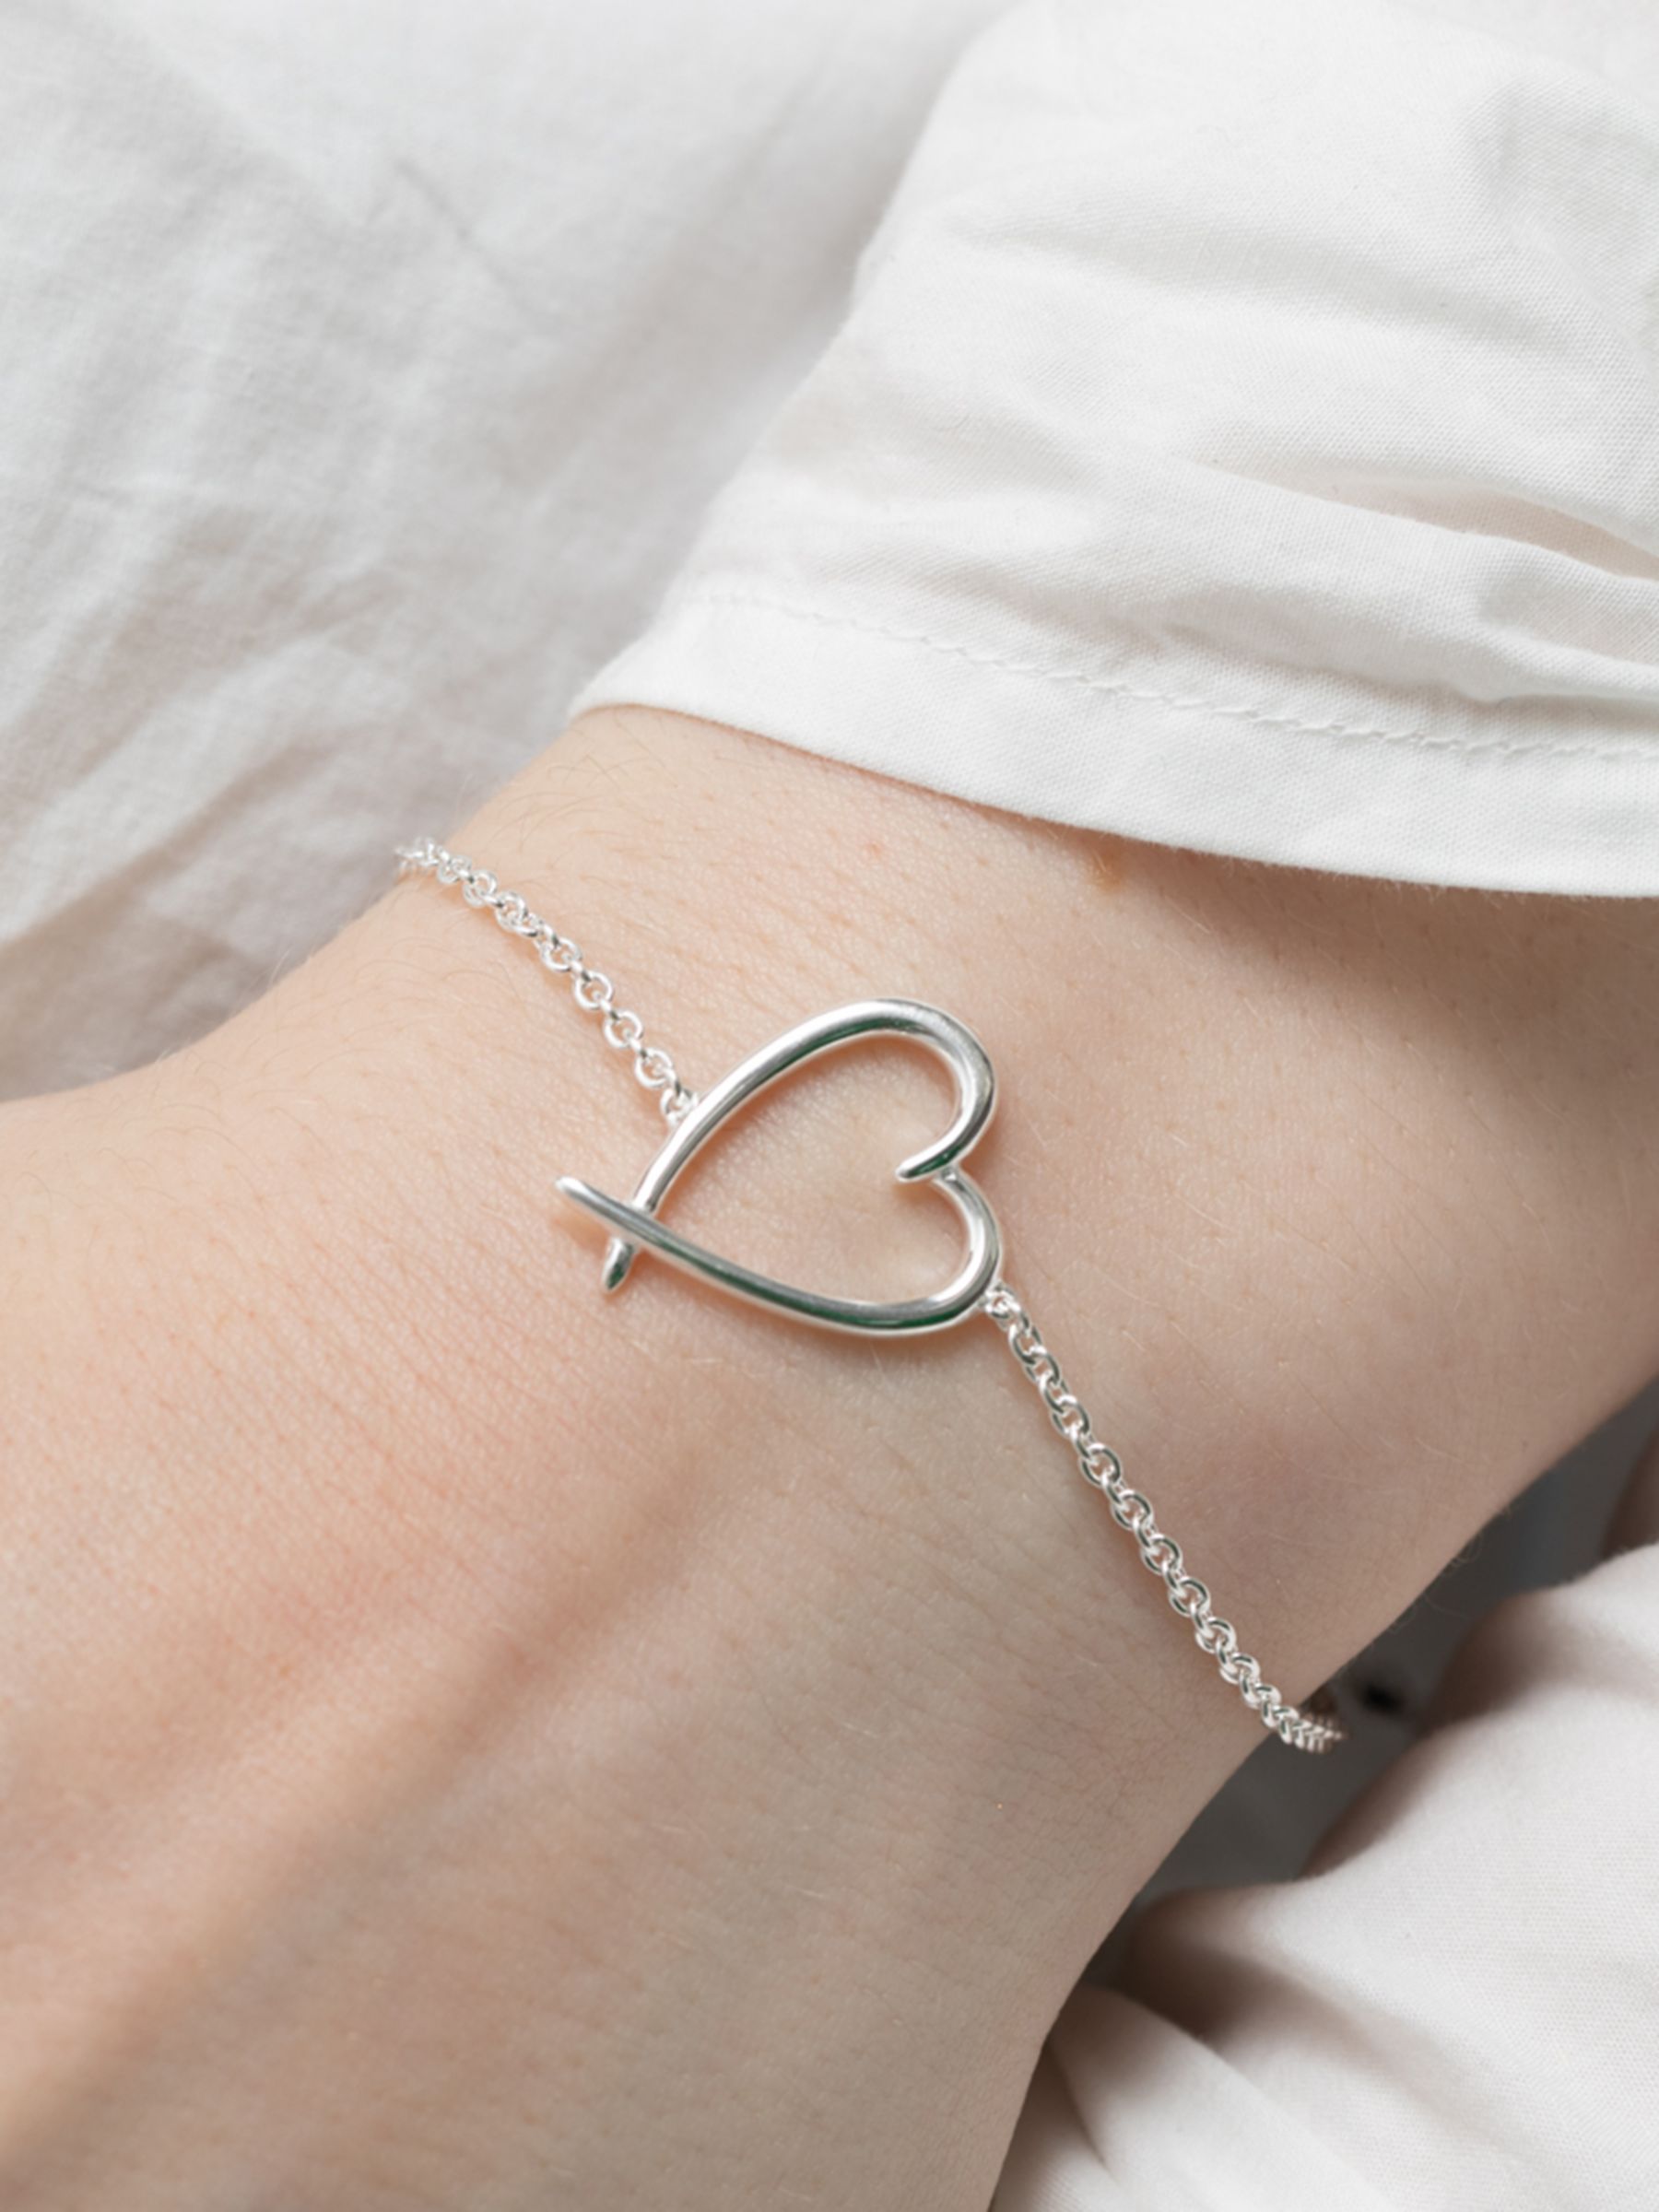 Buy Simply Silver Open Heart Chain Bracelet, Silver Online at johnlewis.com